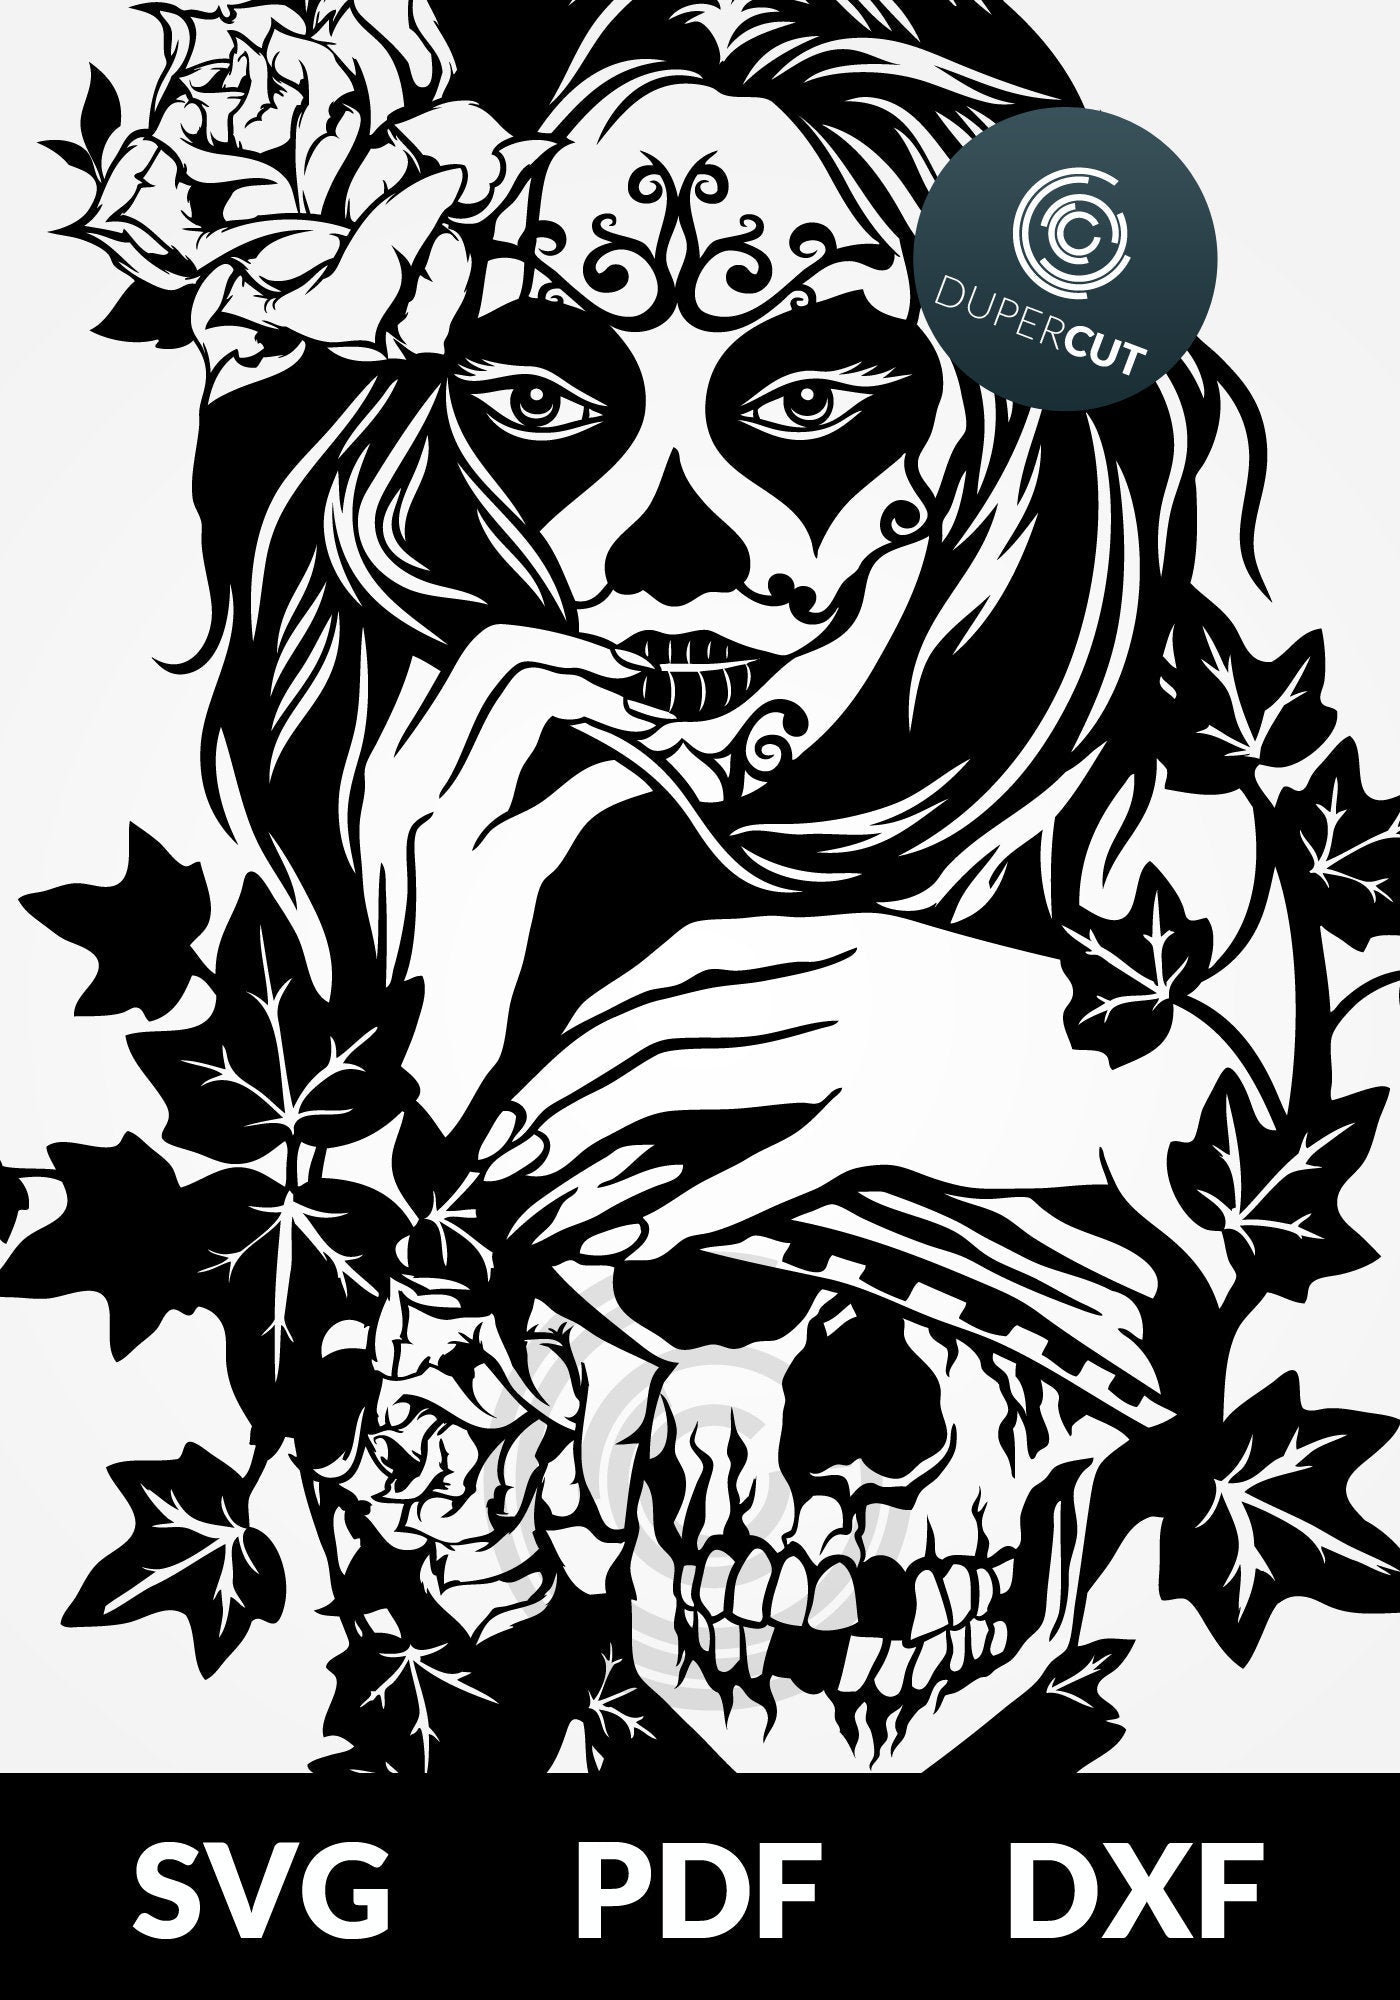 Female sugar skull, black line art, commercial use template - SVG DXF PNG files for Cricut, Glowforge, Silhouette Cameo, CNC Machines